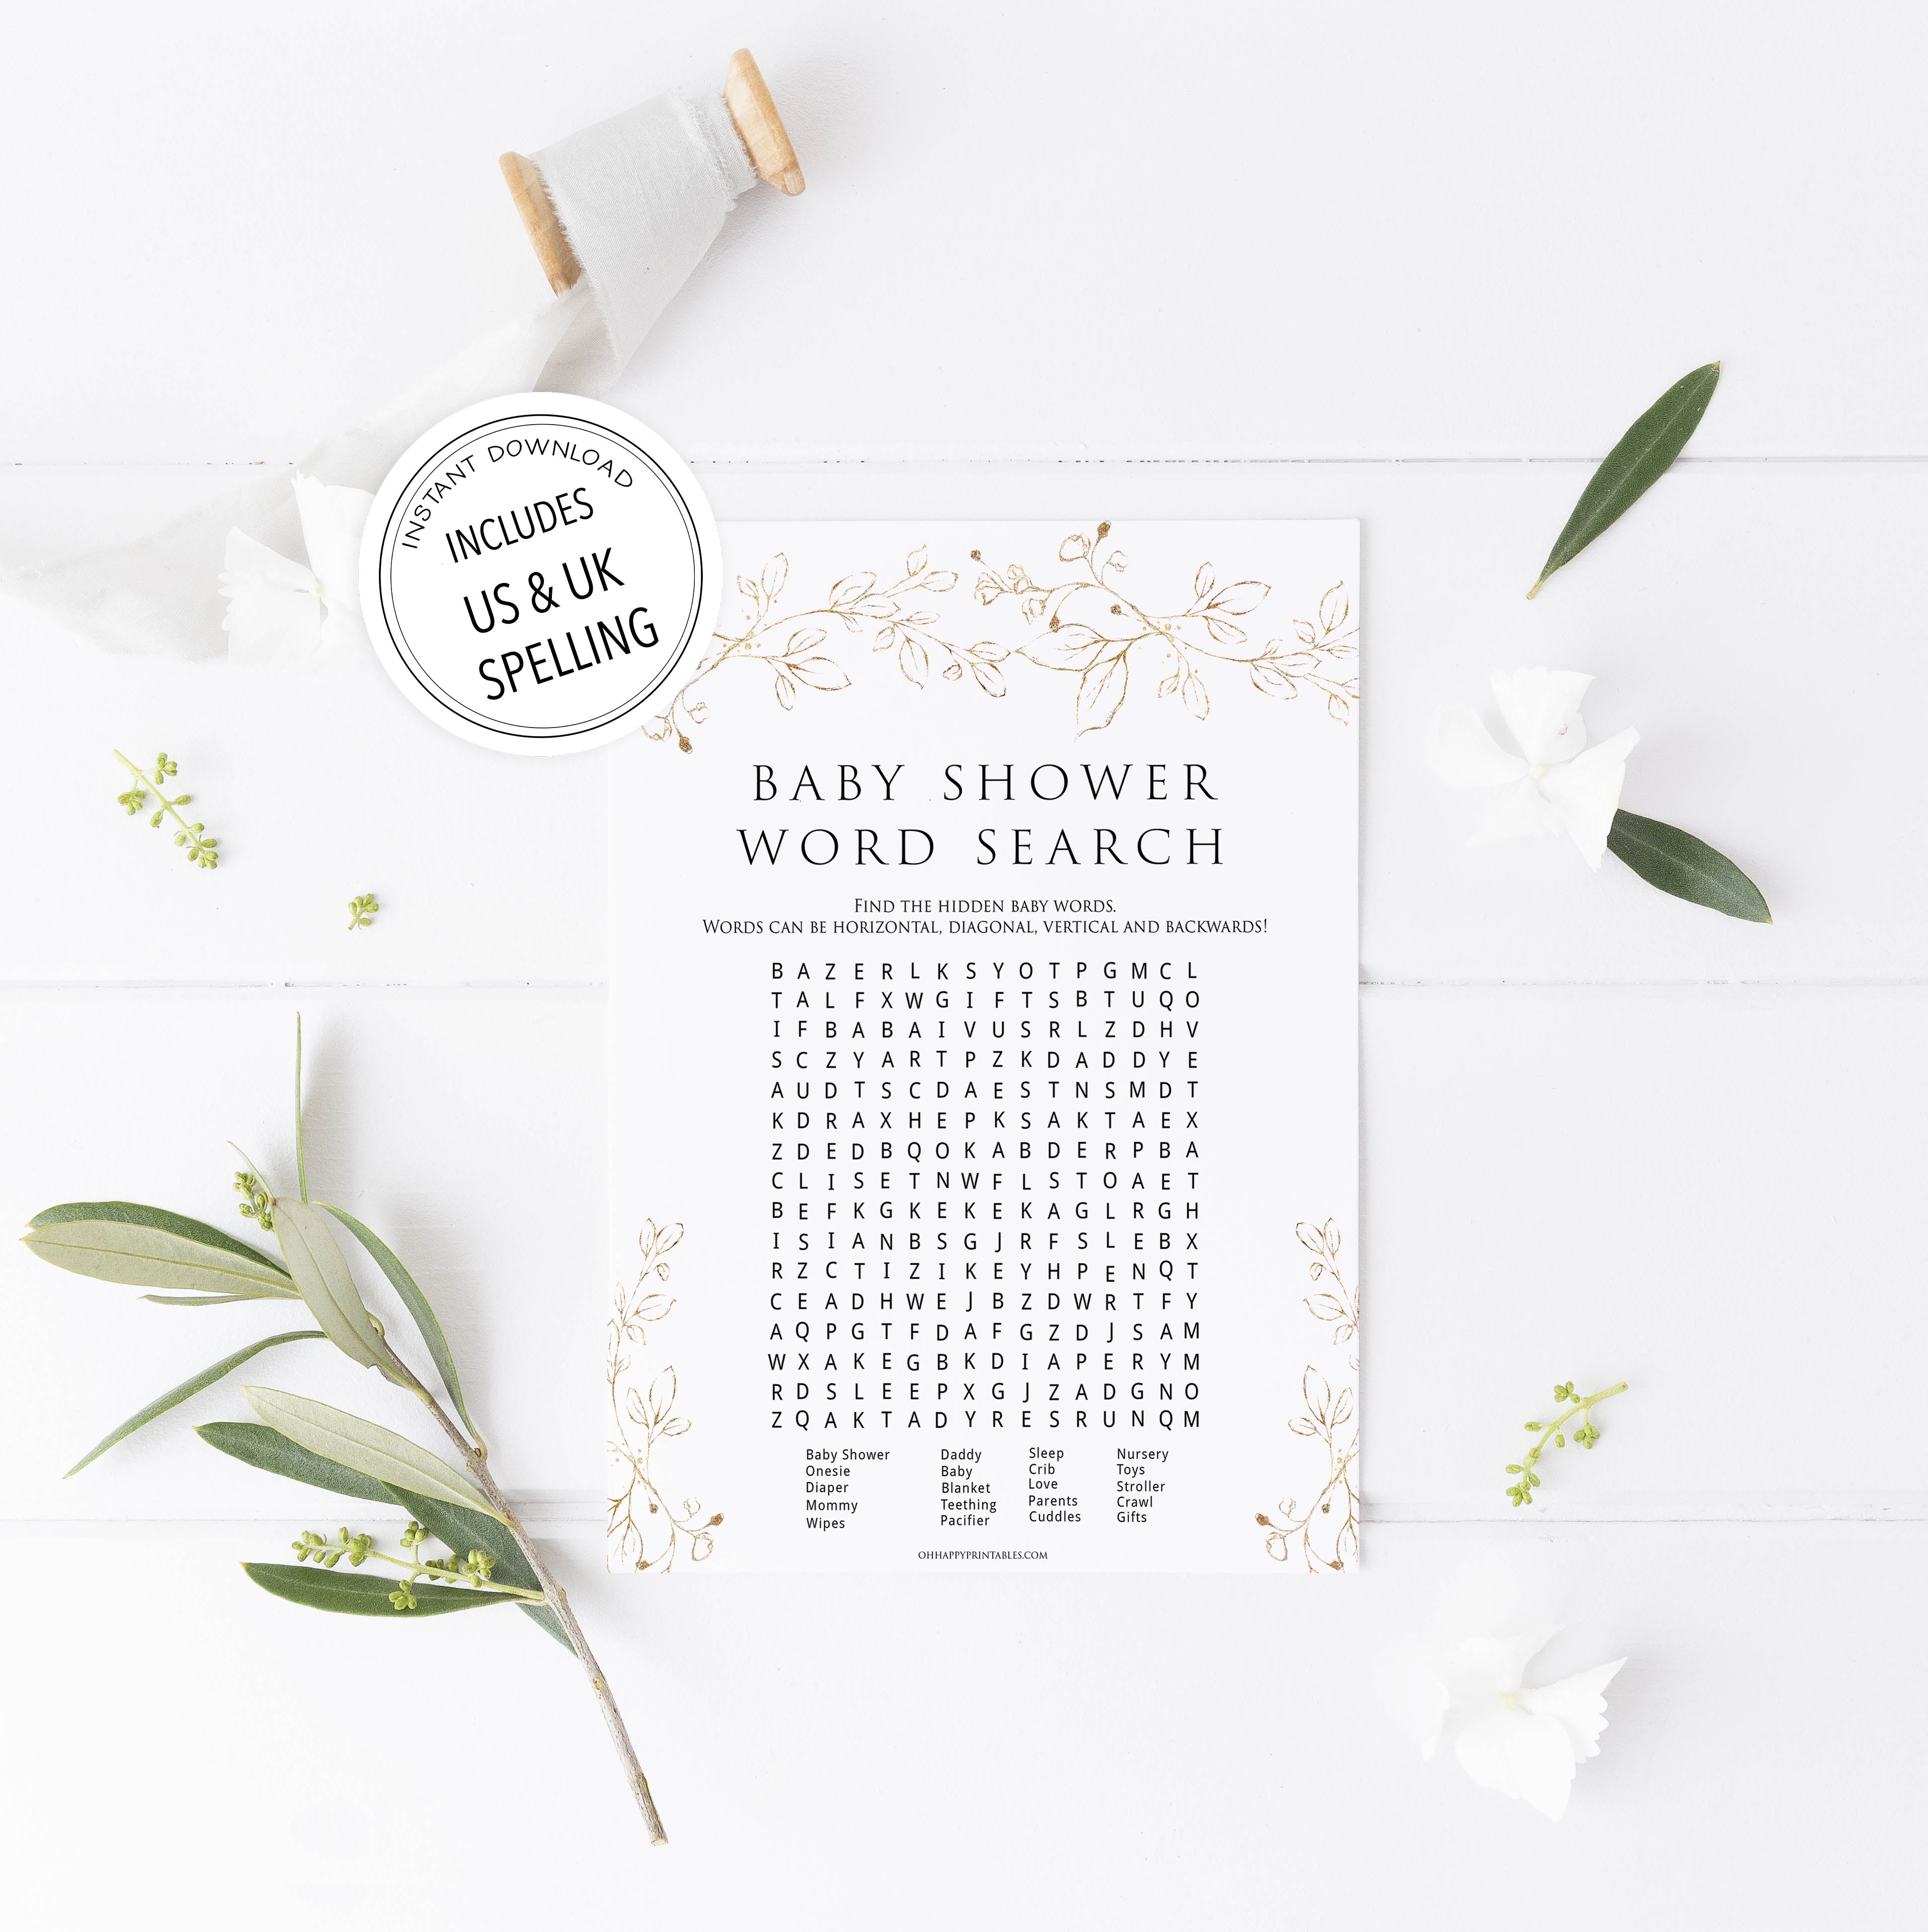 baby shower word search game, Printable baby shower games, gold leaf baby games, baby shower games, fun baby shower ideas, top baby shower ideas, gold leaf baby shower, baby shower games, fun gold leaf baby shower ideas